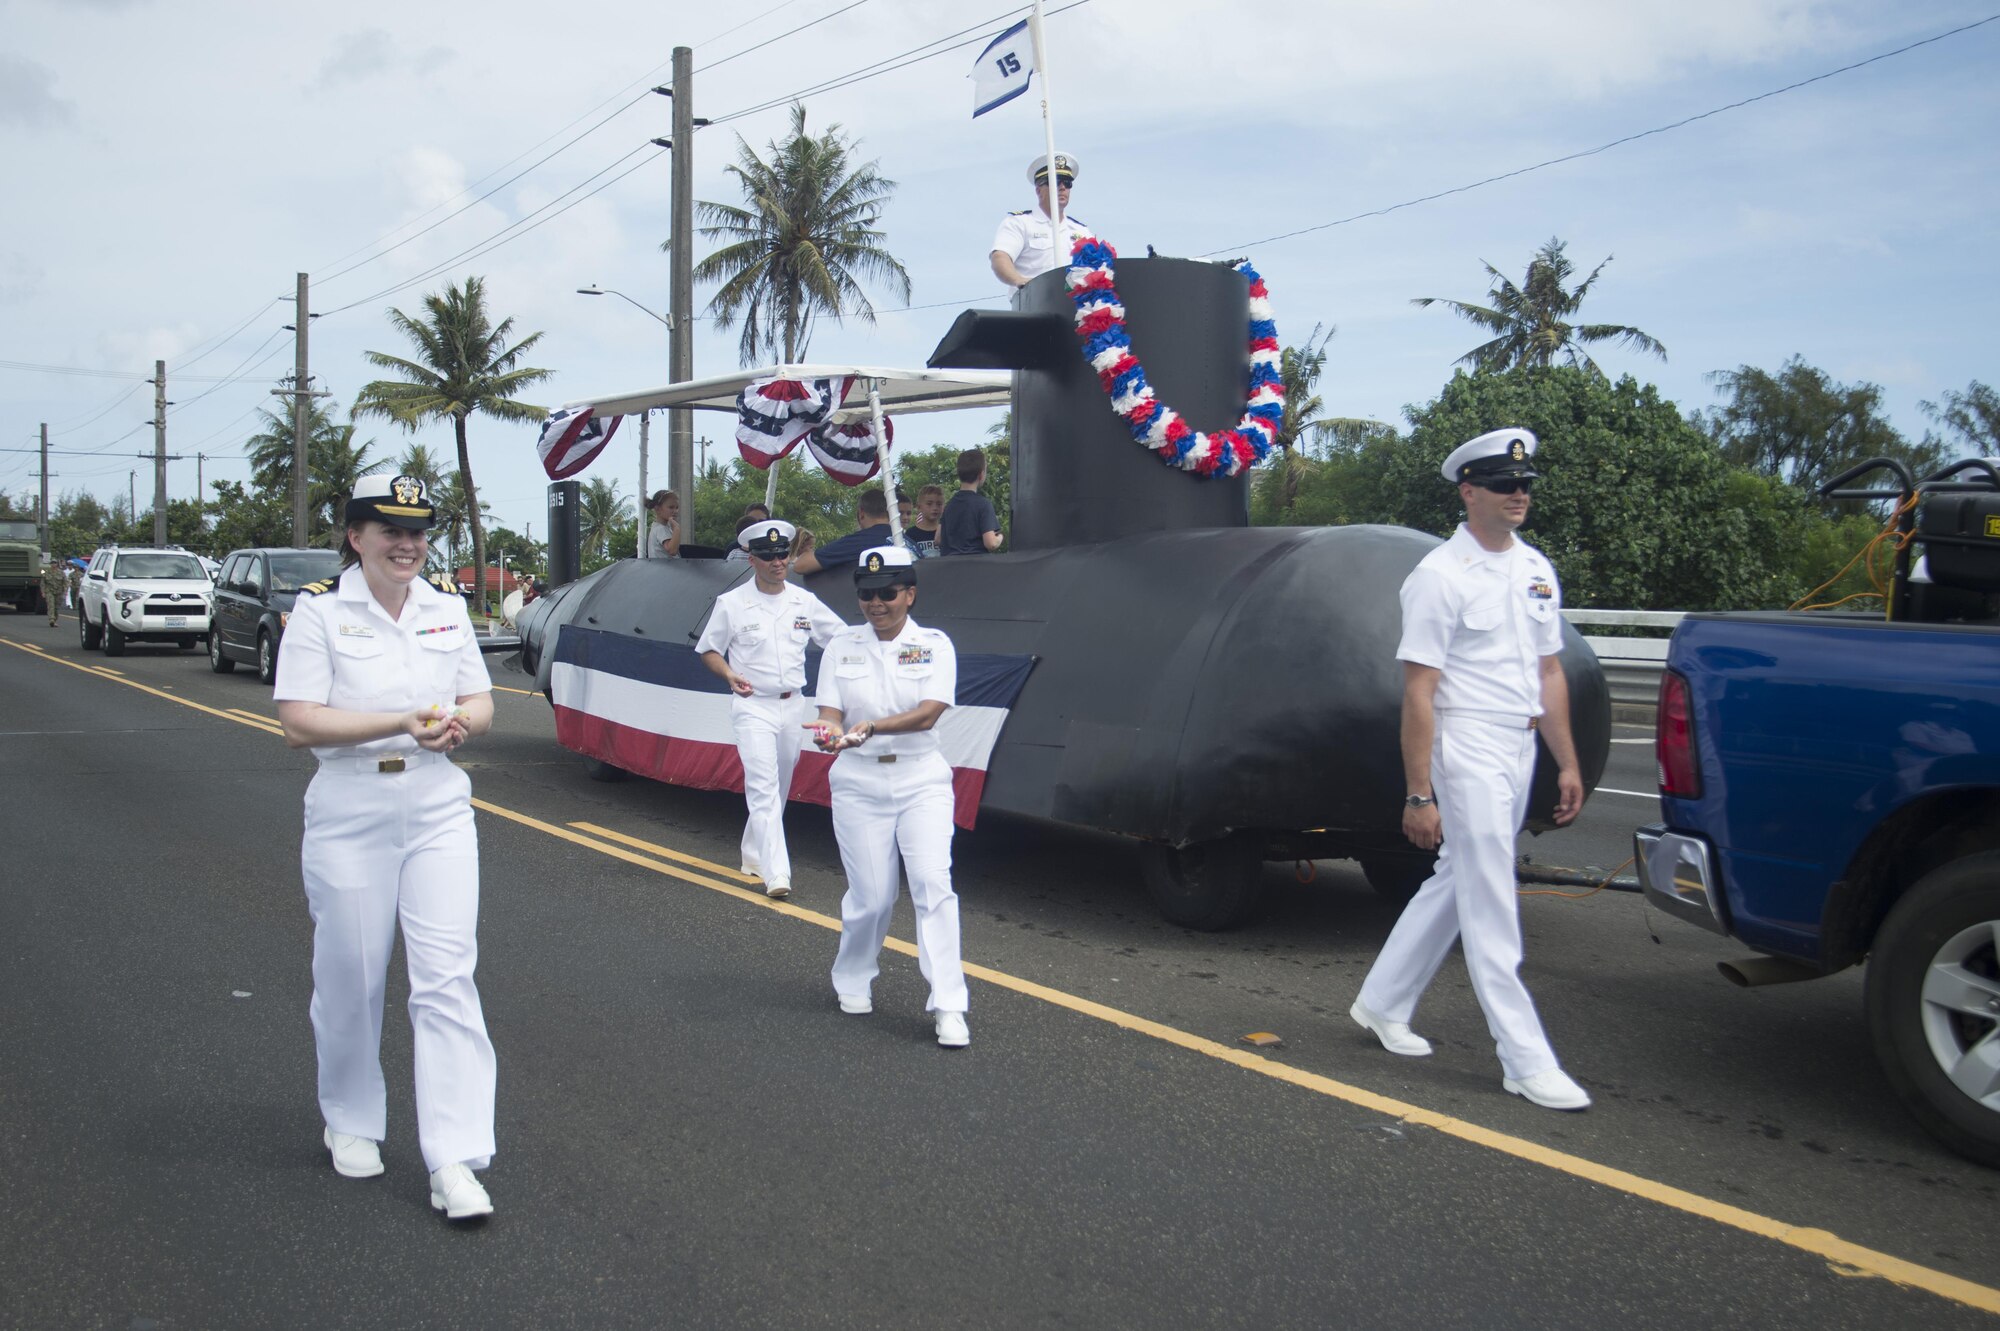 170721-N-JN506-036 HAGATNA, Guam (July 21, 2017) – Sailors from Commander, Submarine Squadron 15 march alongside the command submarine float and distribute candy during Guam's annual Liberation Day Parade in Hagatna, Guam, July 21. The 2017 Guam Liberation Parade celebrates the 73rd anniversary of the liberation of Guam from Japanese occupation by U.S. forces during World War II. (U.S. Navy photo by Mass Communication Specialist 1st Class Jamica Johnson/Released)